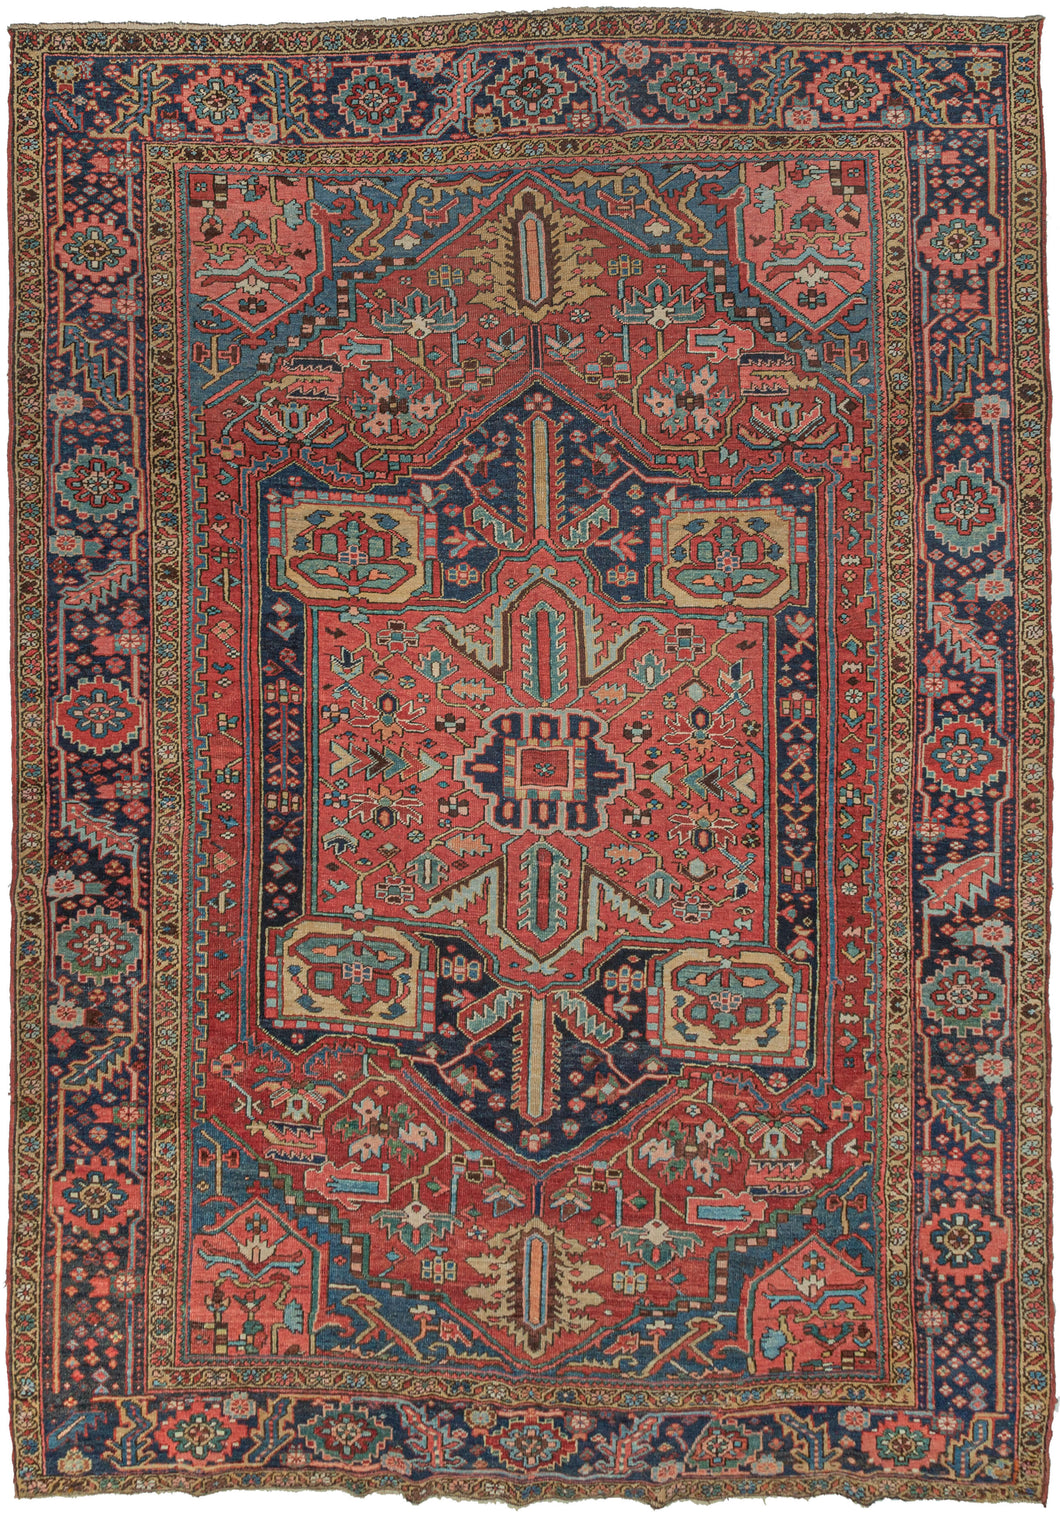 Antique roomsize Heriz rug featuring a geometric central medallion on a madder red ground. The design of the more boxy medallion throughout completely changes the composition giving this piece a unique feel. Soft pinks and gold work well with jewel-toned blues and greens that really sing. Framed by a main border of rosettes and serrated leaves, the border pattern breaks near the bottom edge on both sides where the weaver filled the space with various small rosettes like a patch of wildflowers.